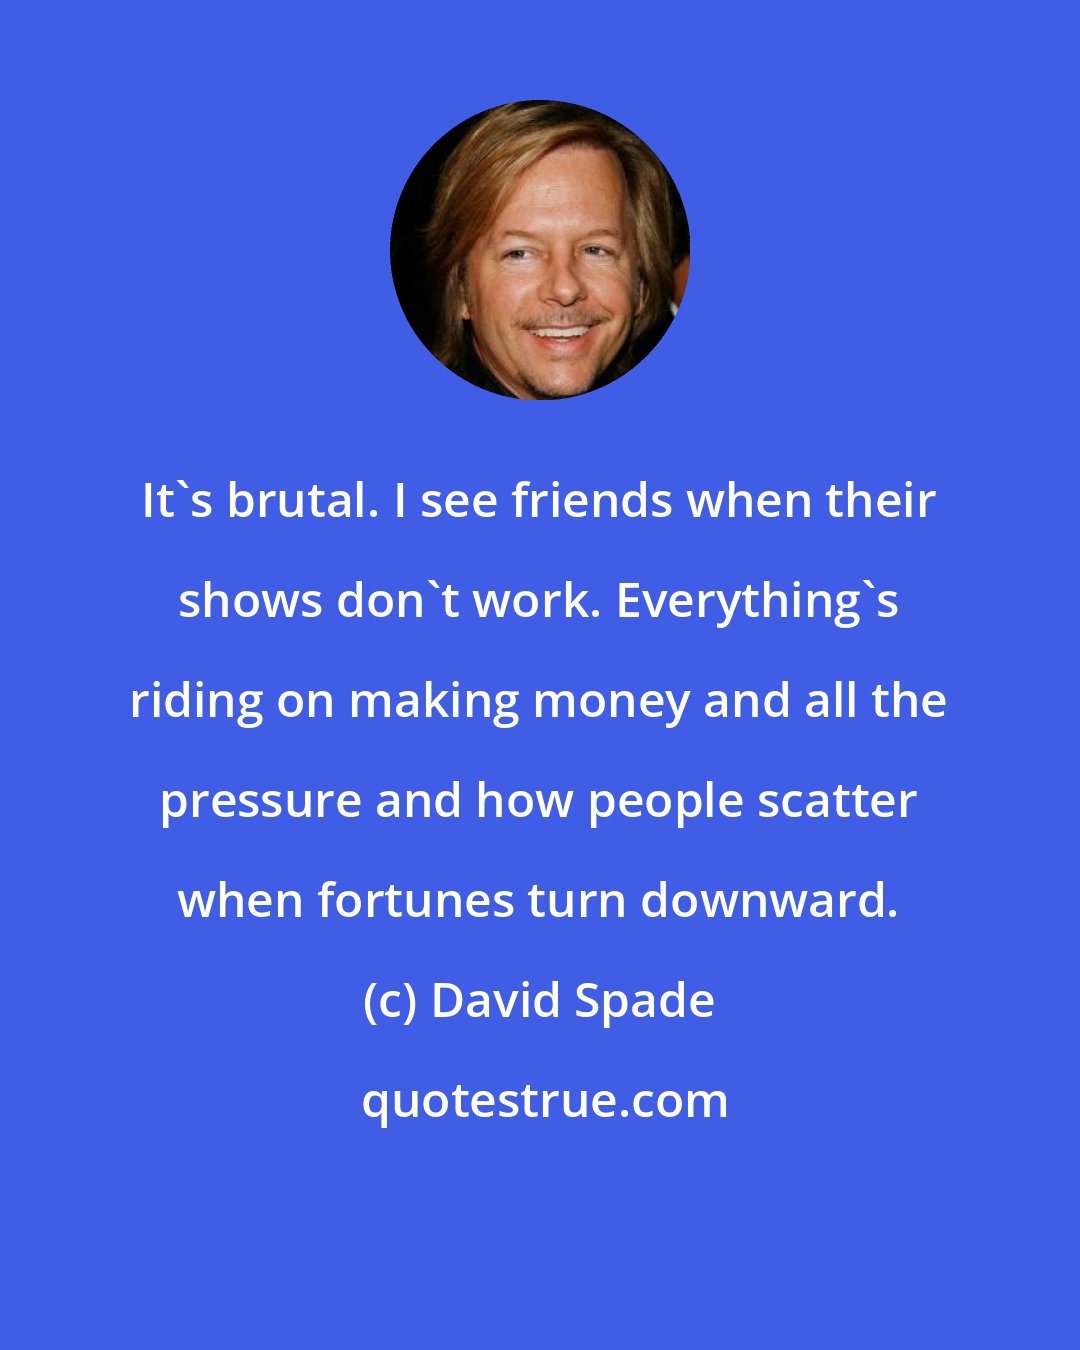 David Spade: It's brutal. I see friends when their shows don't work. Everything's riding on making money and all the pressure and how people scatter when fortunes turn downward.